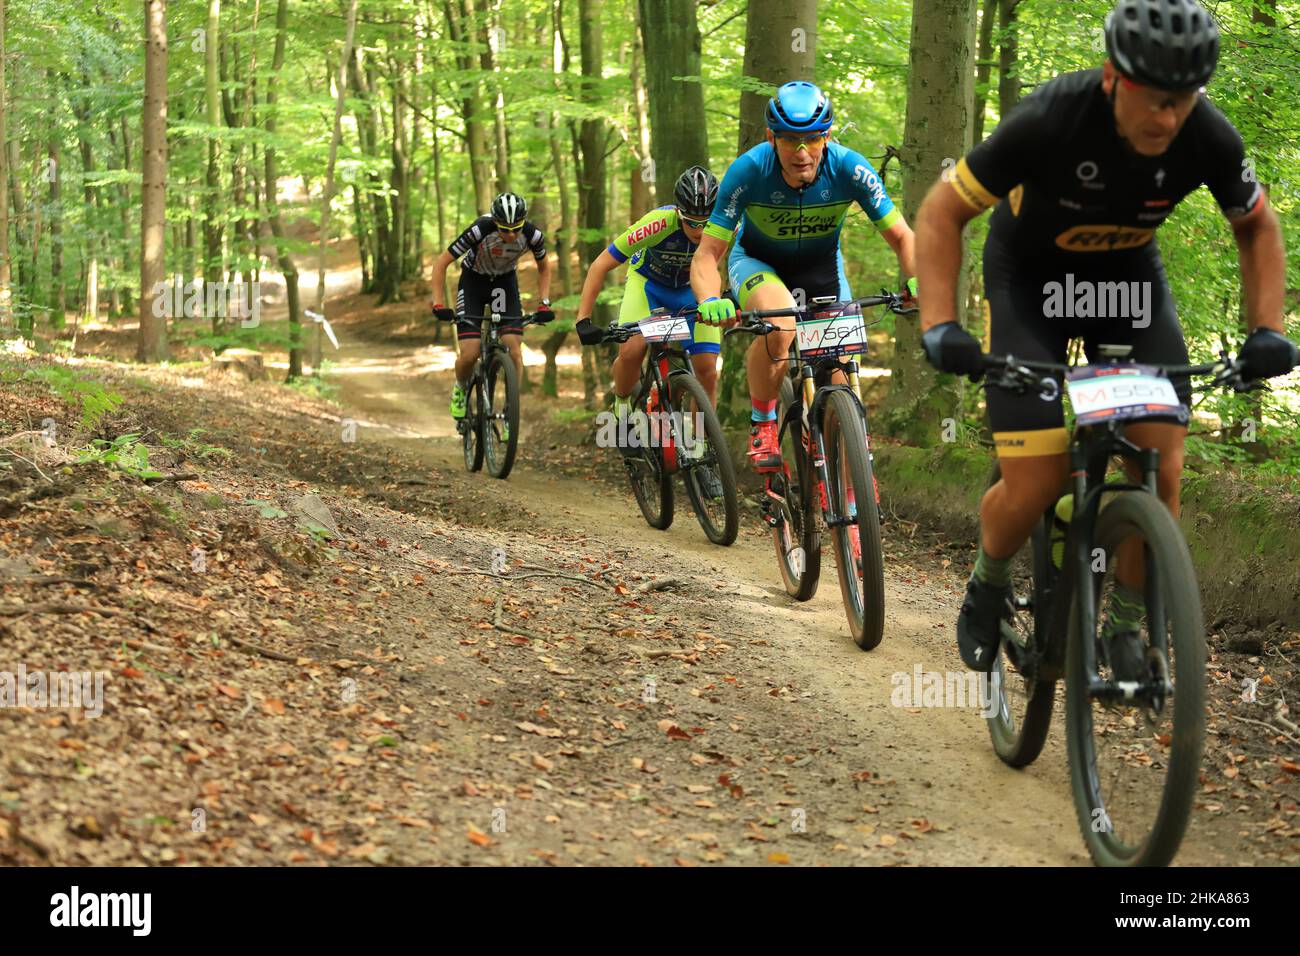 7R CST MTB Gdynia Marathon, Gdynia, Poland - 20 Sep 2020: XCM Polish Championship. The competitors racing along the forest roads of the Tricity Landsc Stock Photo